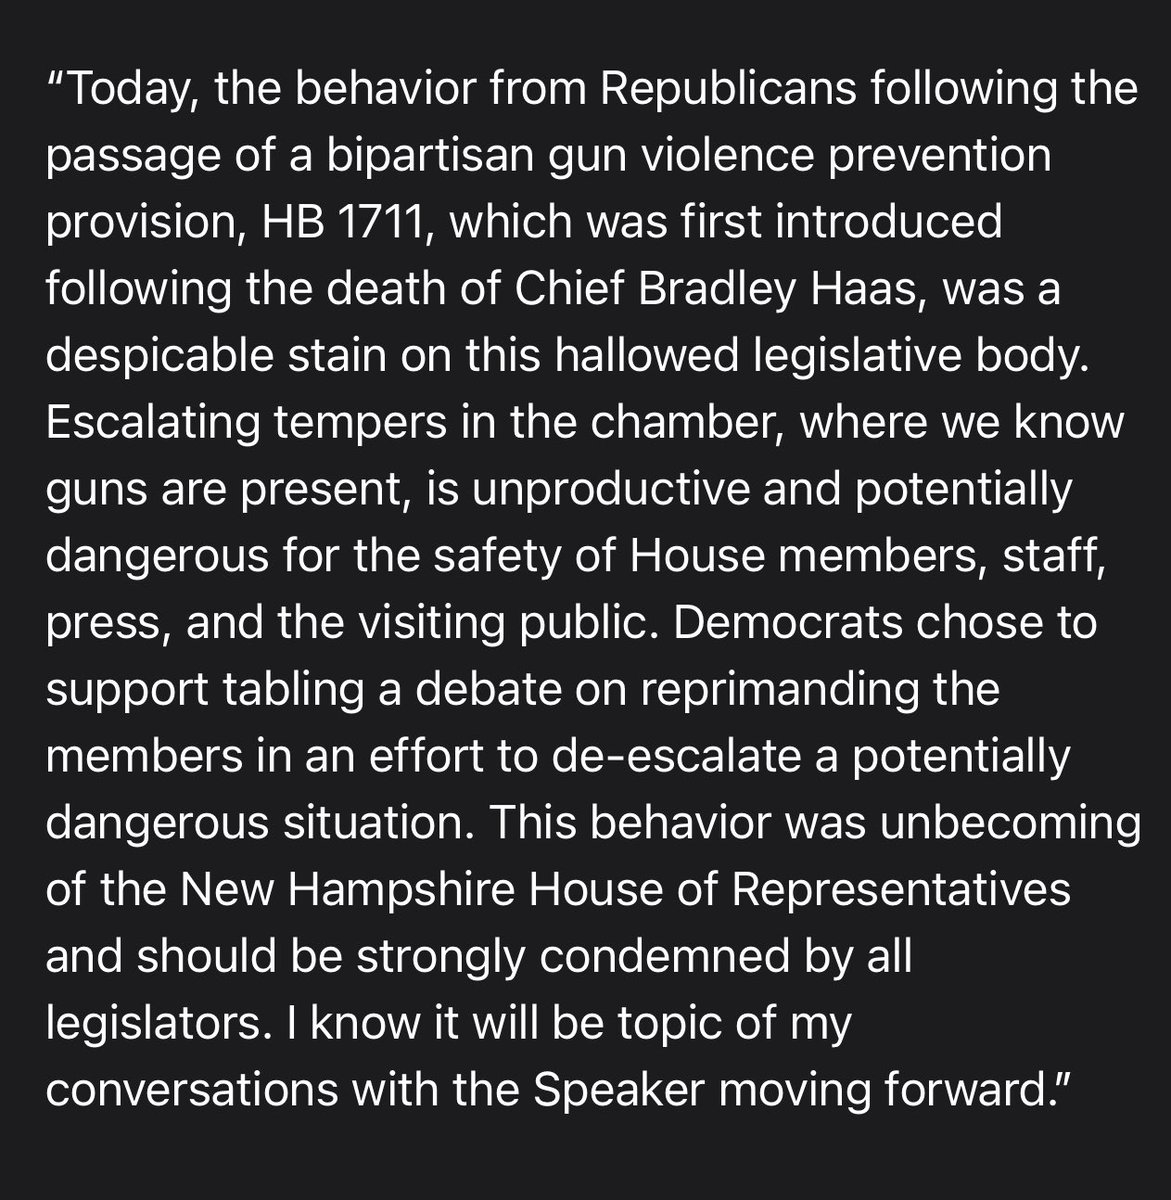 NEW: Statement from House Democratic Leader Matt Wilhelm on near fist-fight that broke out on the floor of the NH House between two Republicans. “Escalating tempers in the chamber, where we know guns are present, is unproductive and potentially dangerous” #NHPolitics